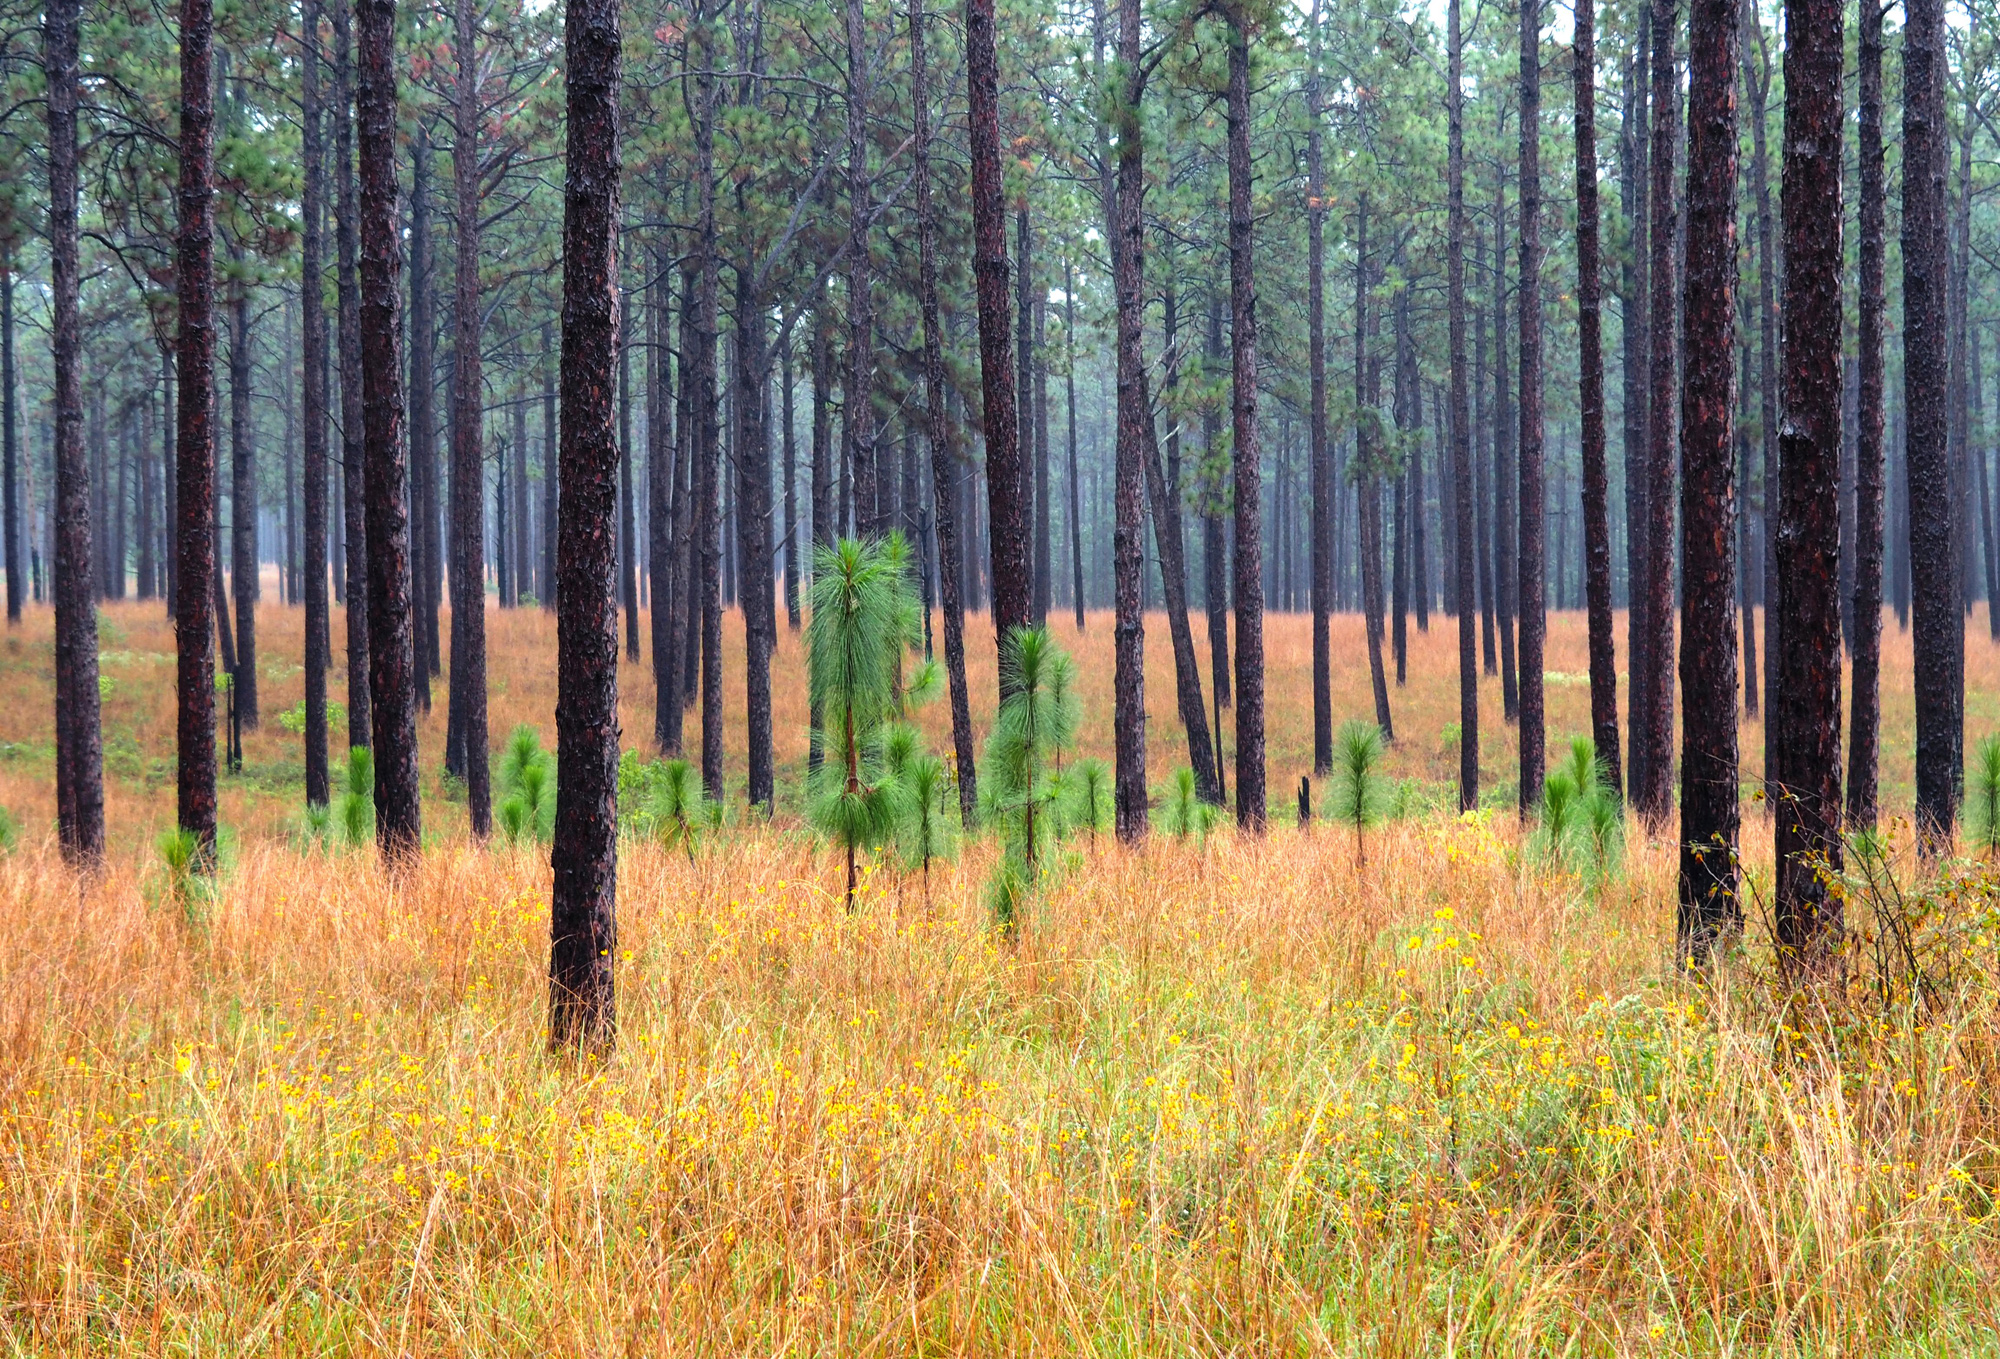 Saplings sprout from the grassy understory beneath mature longleaf in Kisatchie National Forest in Louisiana. Credit: Randy Tate/The Longleaf Alliance